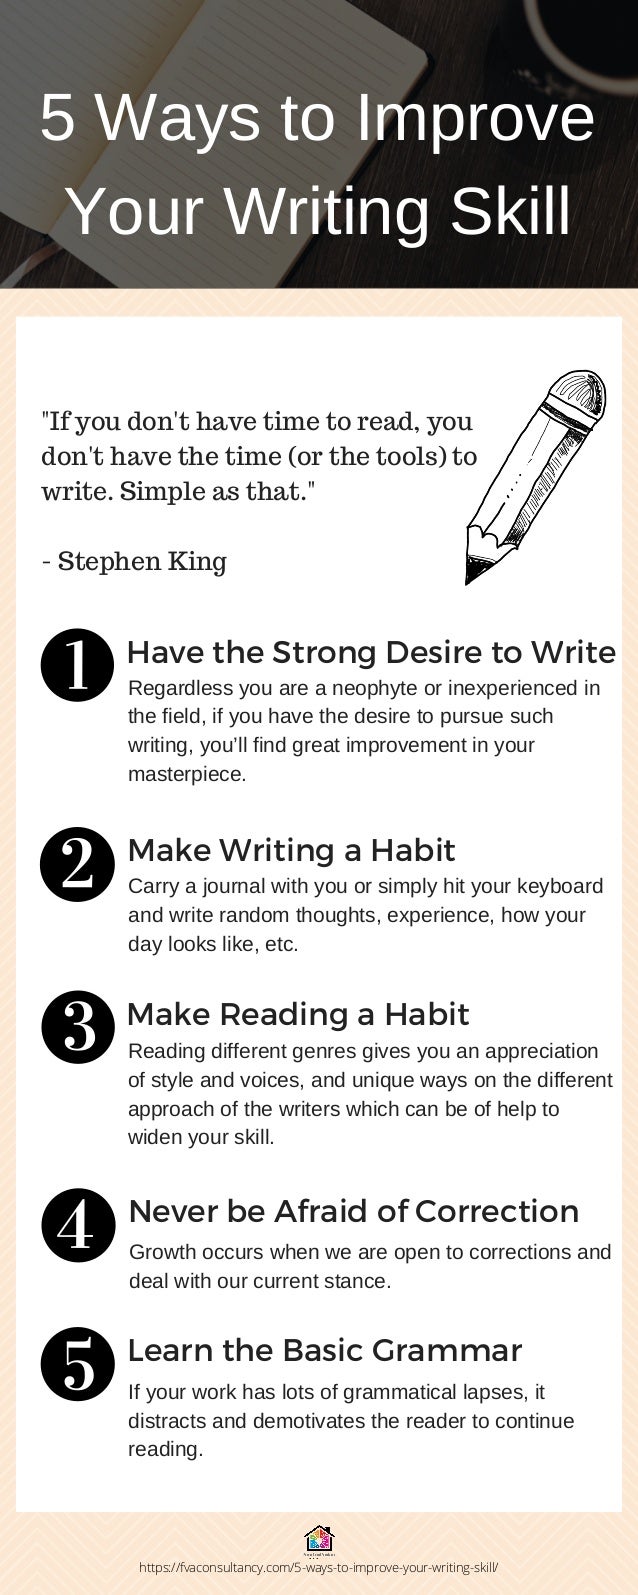 6 ways to improve your writing skill